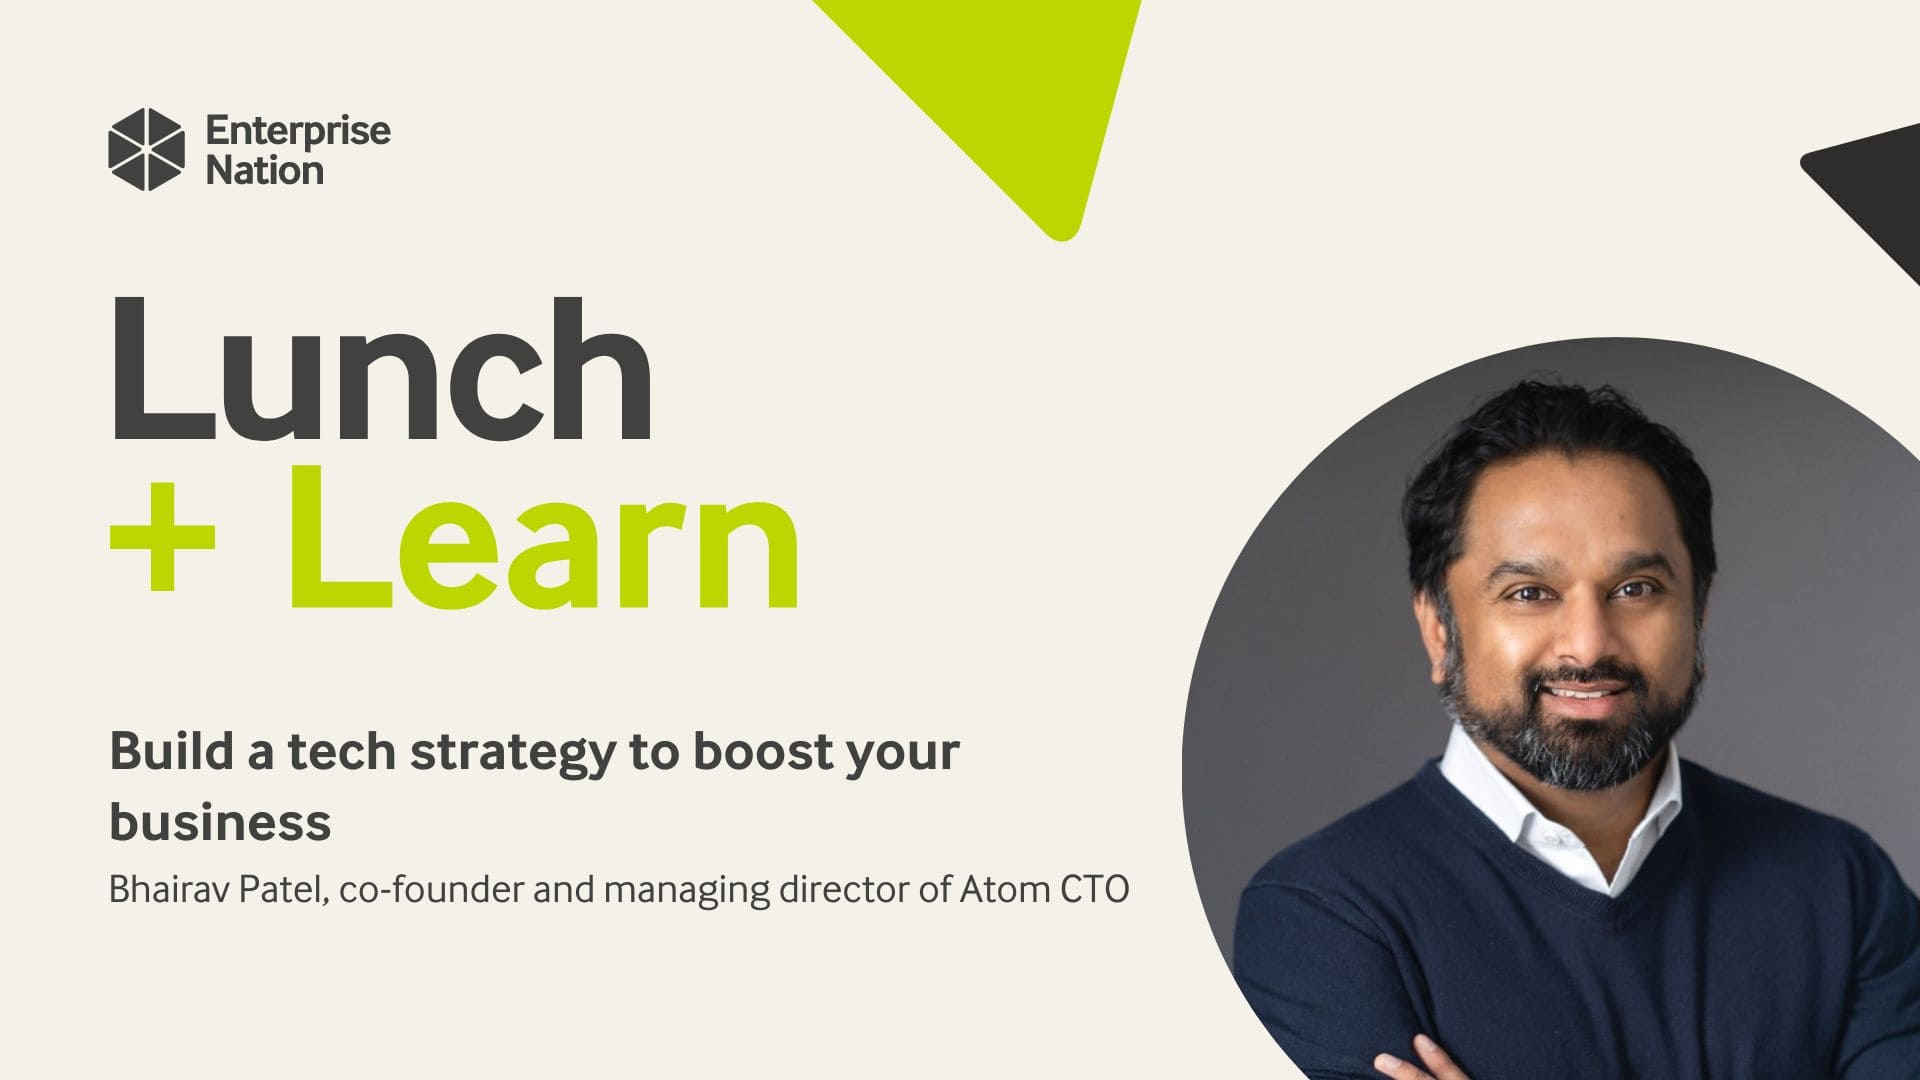 Lunch and Learn: Build a tech strategy to boost your business